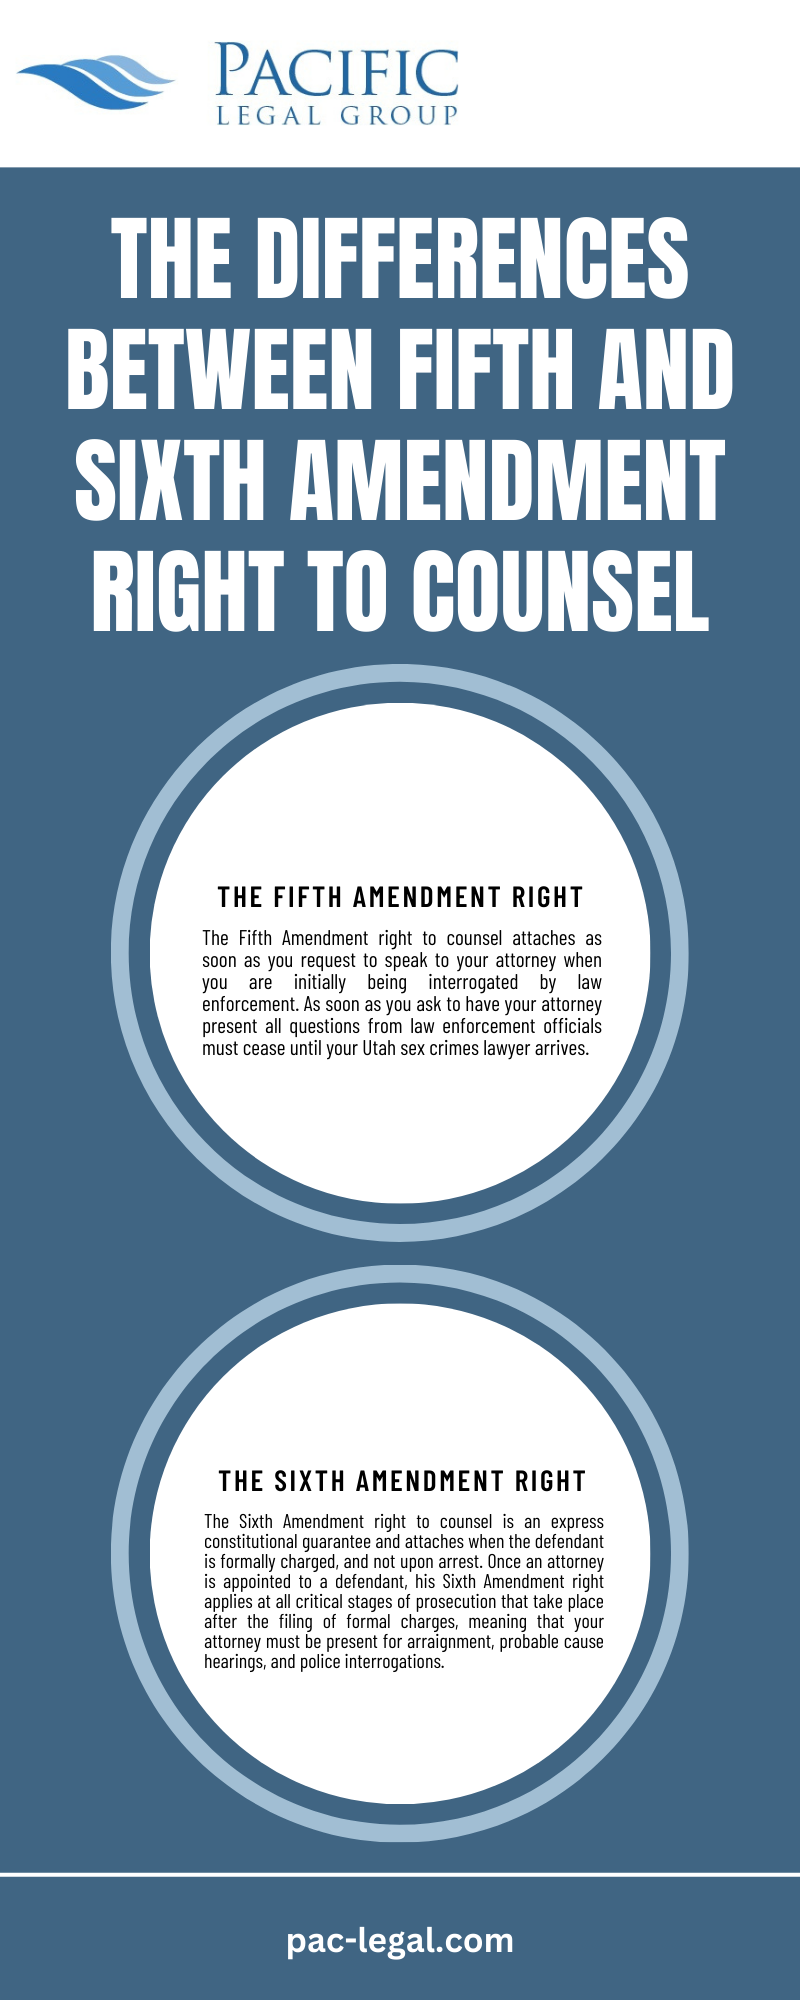 The Differences Between Fifth And Sixth Amendment Right To Counsel Infographic